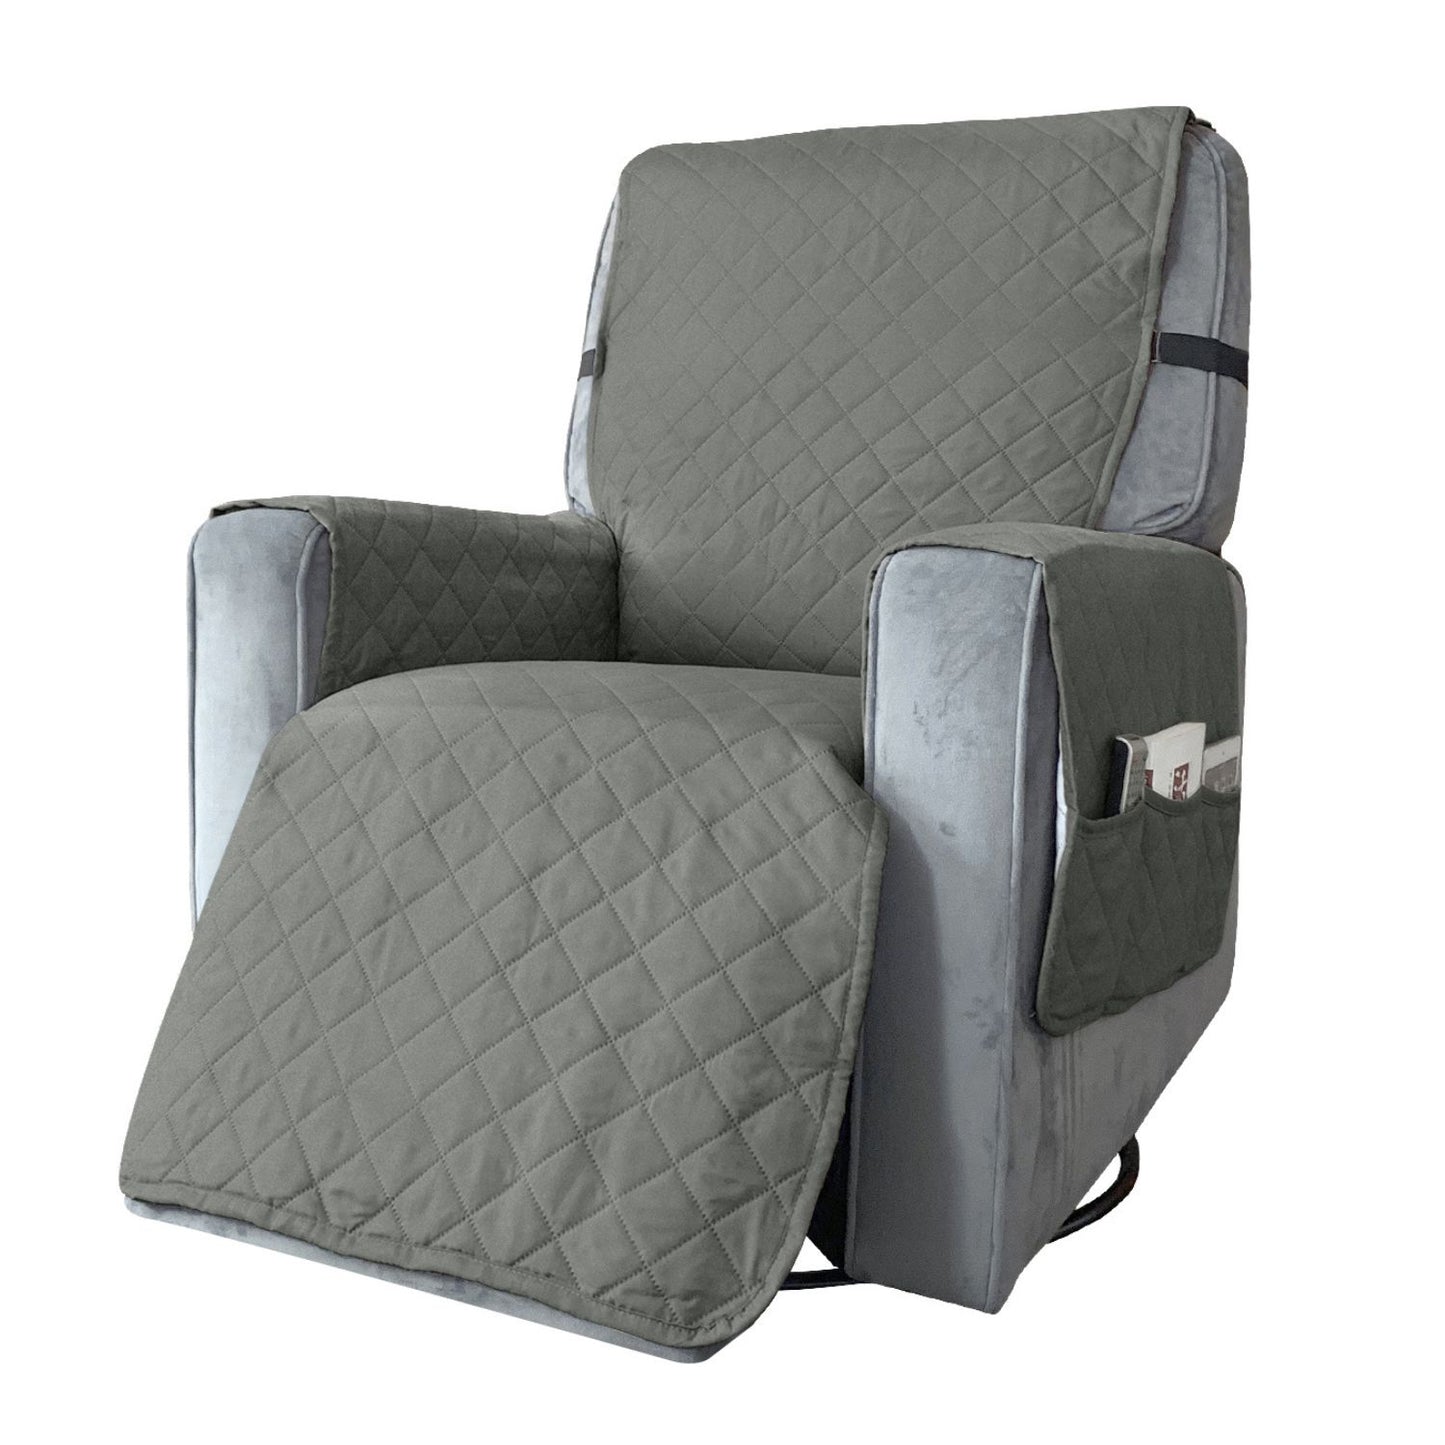 FLOOFI Pet Sofa Cover Recliner Chair S Size with Pocket (Light Grey) FI-PSC-116-BY